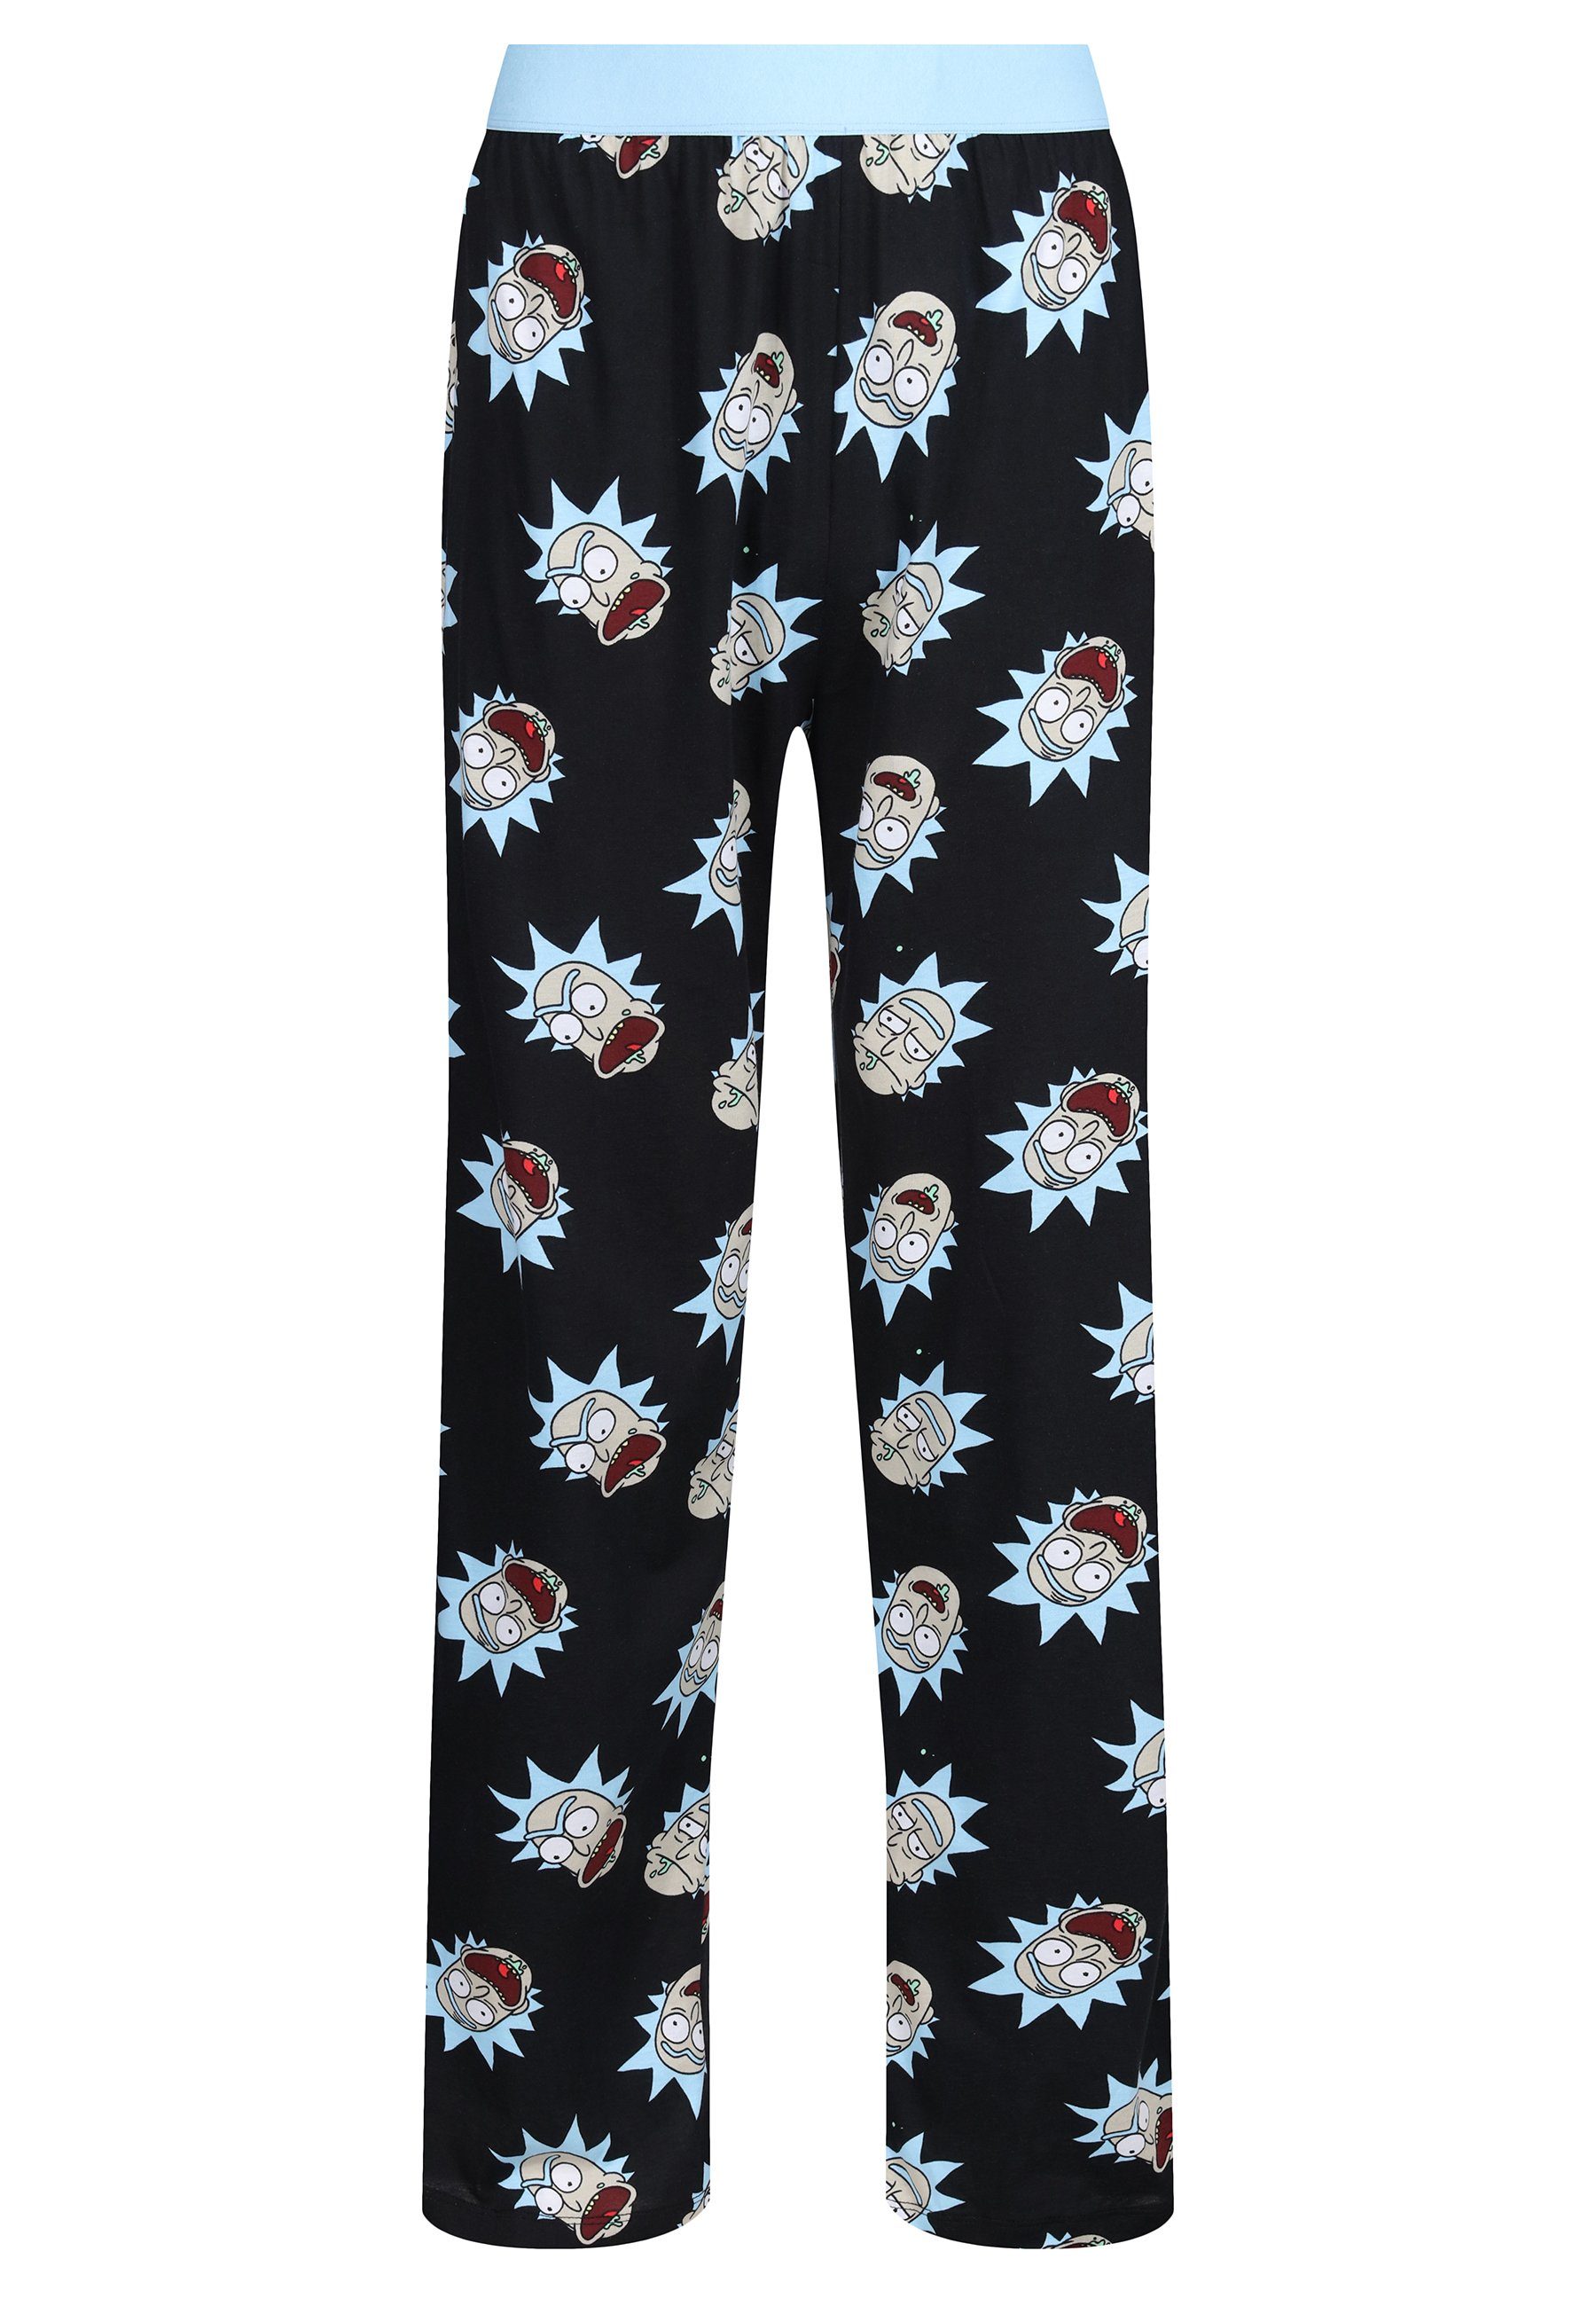 Faces Recovered Loungepants Lounge Black over Rick all - Pant Morty - print and